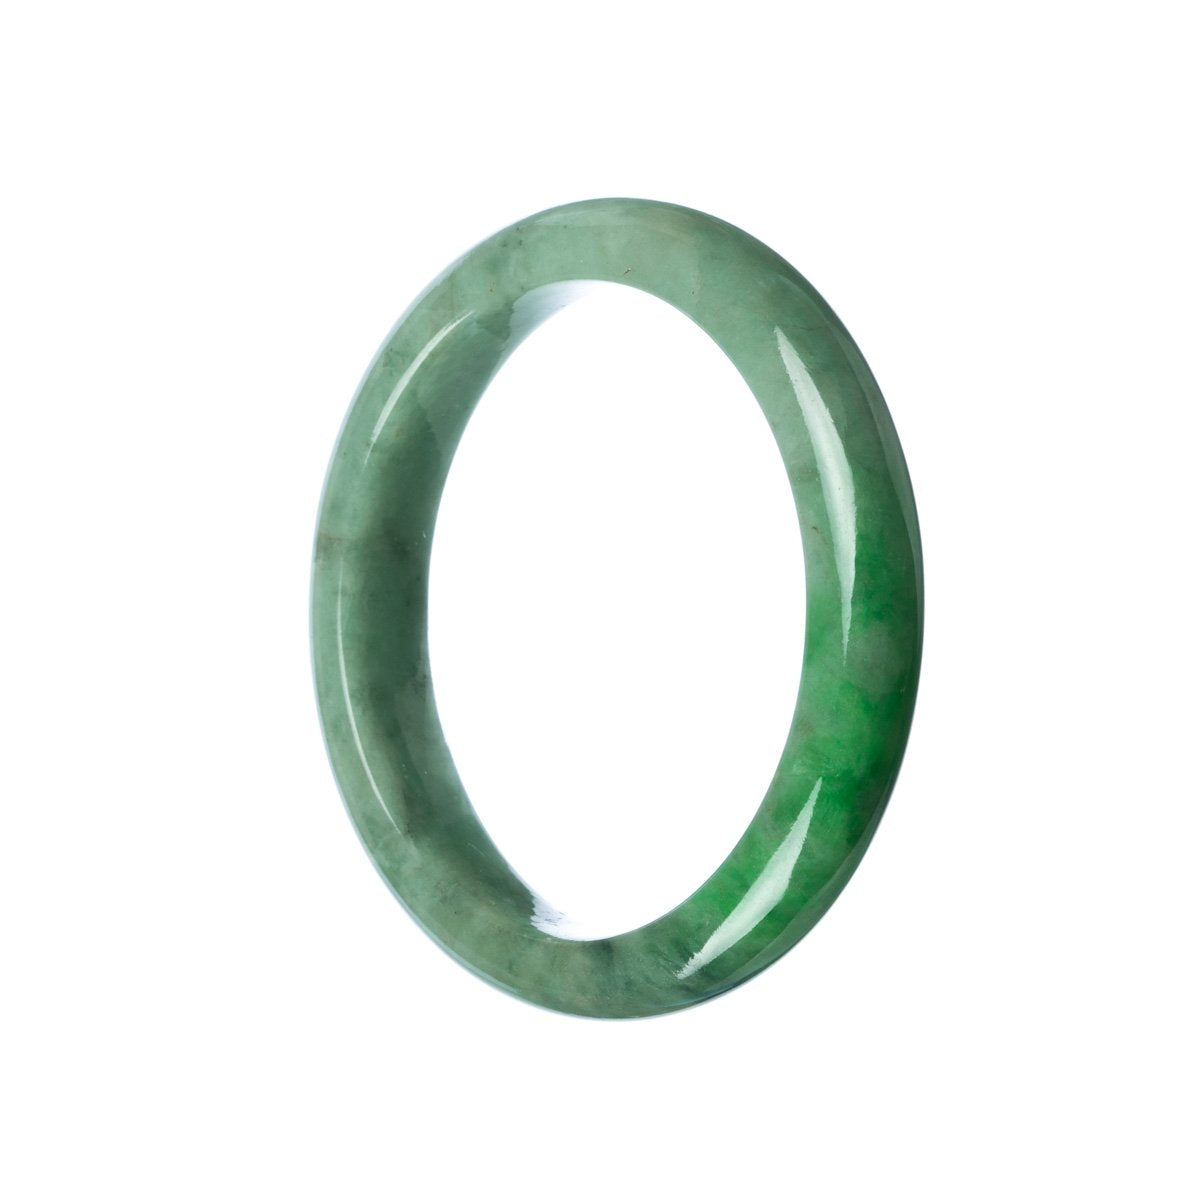 A close-up image of a beautiful green jade bracelet, crafted with high-quality grade A jade stones. The bracelet features a semi-round shape and has a diameter of 58mm. Perfect for adding a touch of elegance to any outfit.